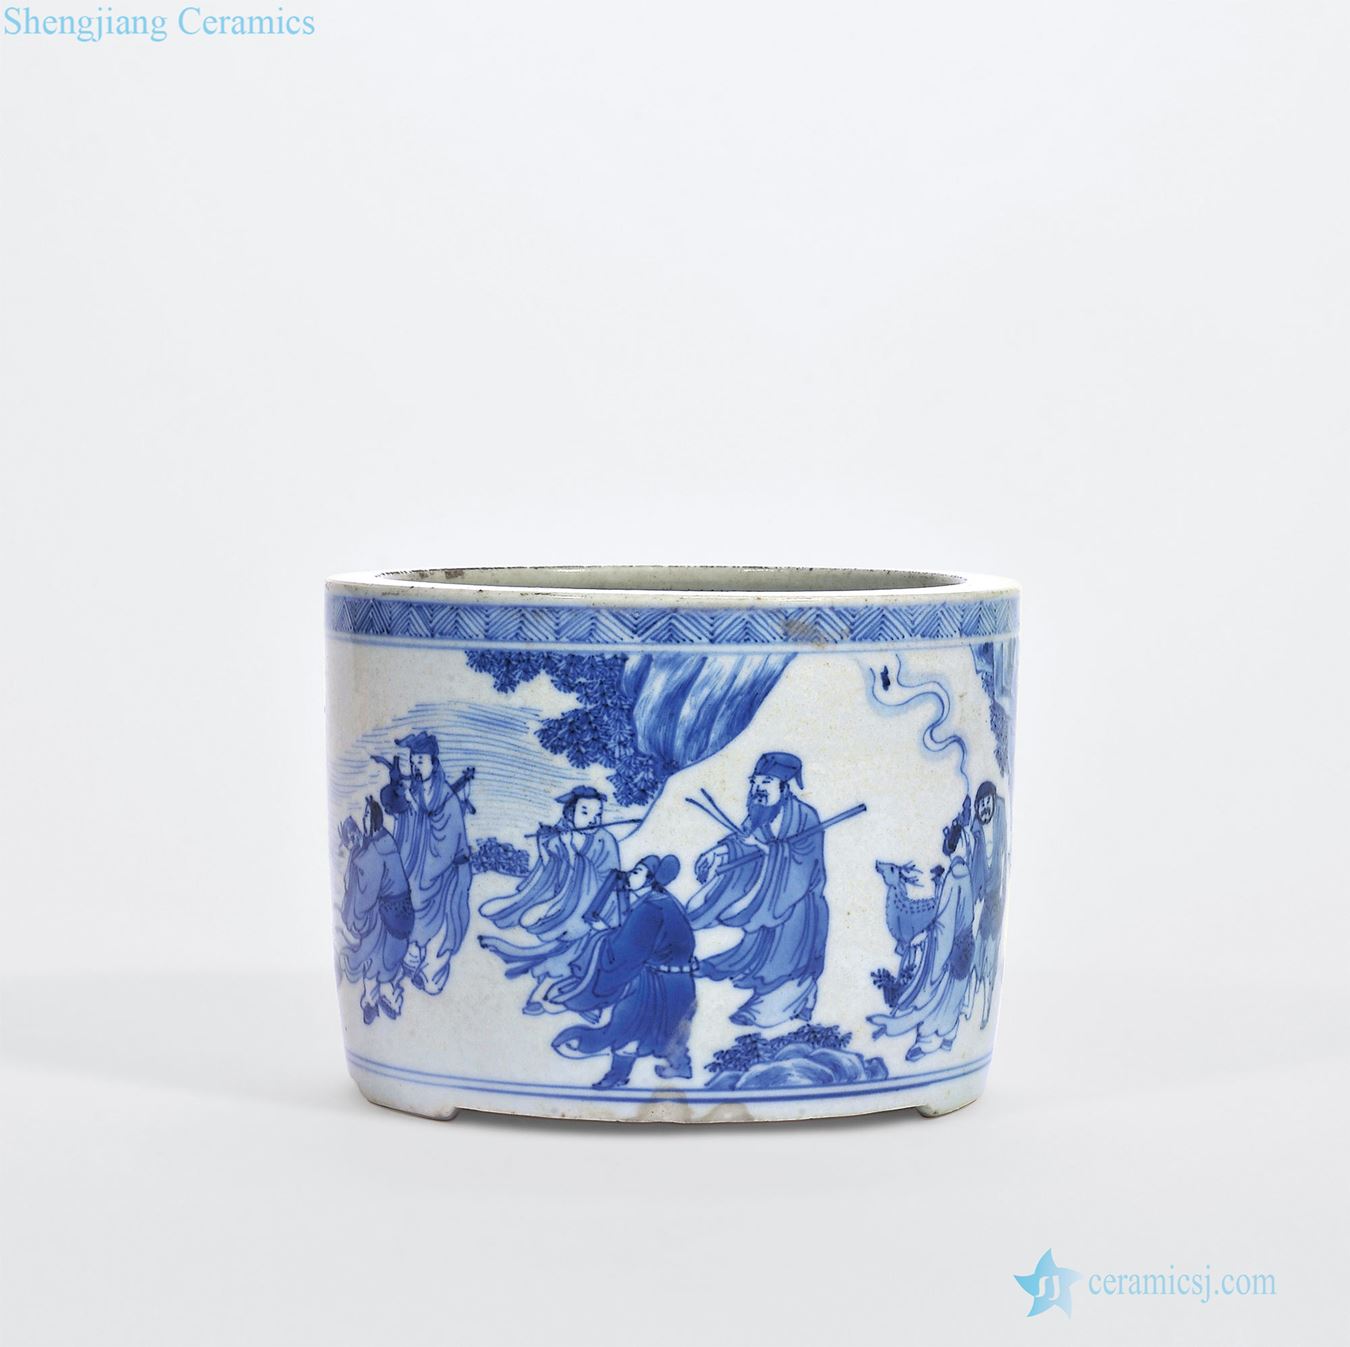 The qing emperor kangxi in the early Blue and white the eight immortals celebrates the life of furnace with three legs